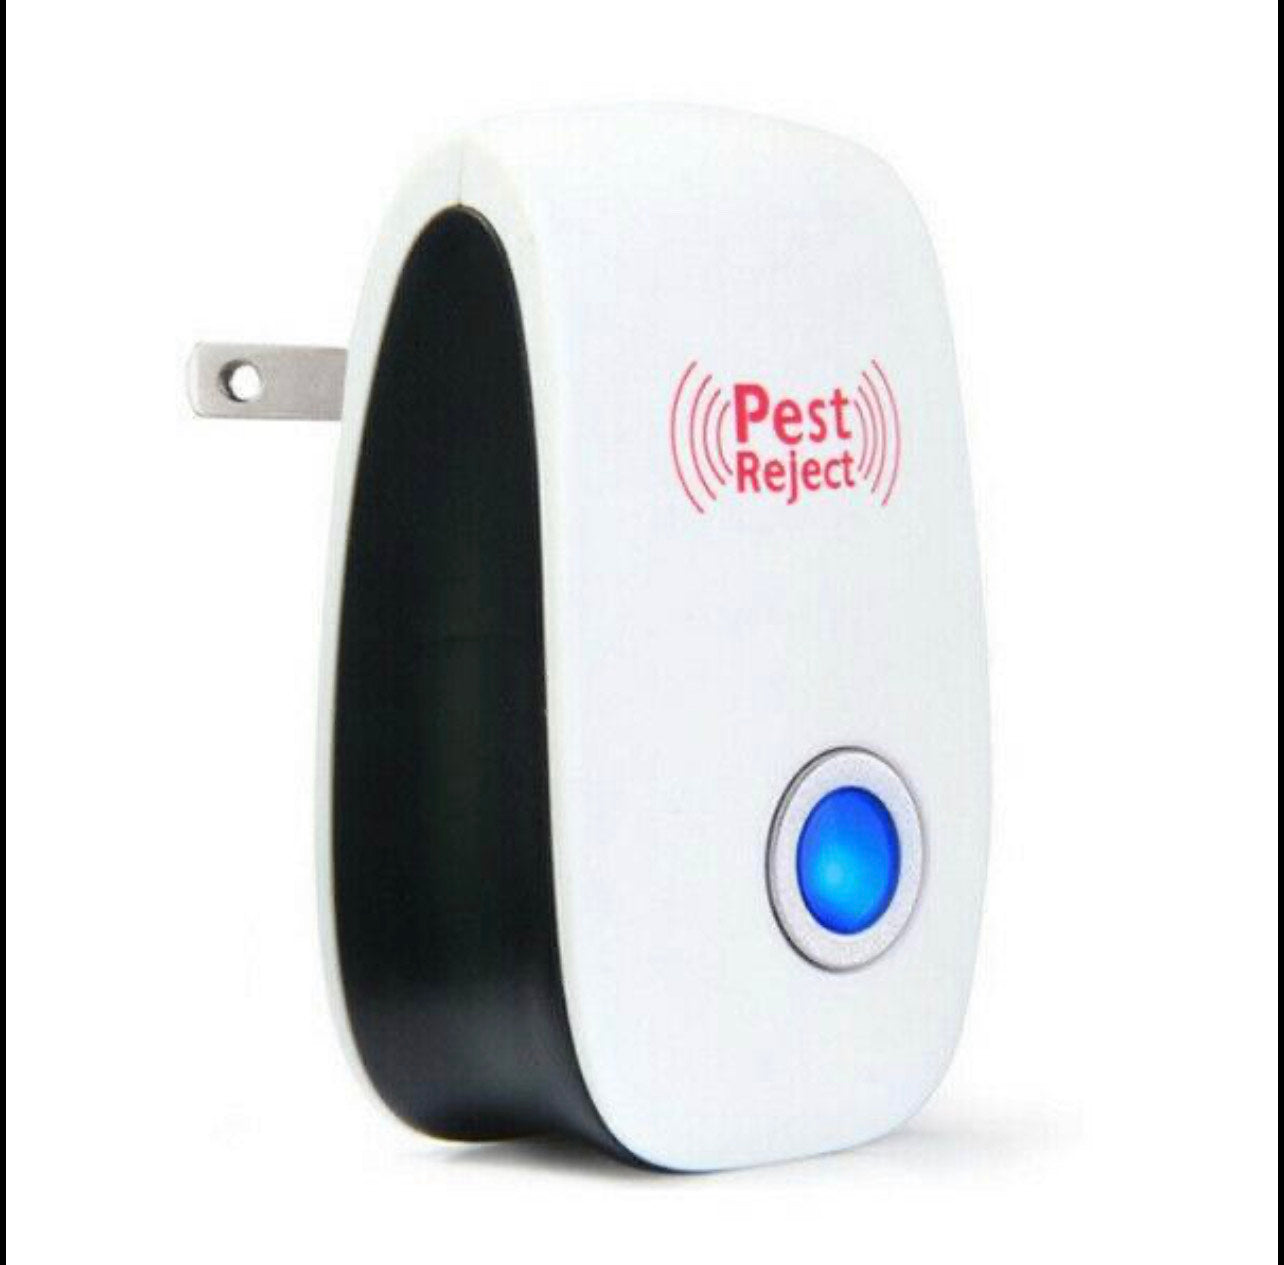 Electronic Pest Reject Control Ultrasonic Repellent Home Bug Rat Spider Roaches home safe tools gift